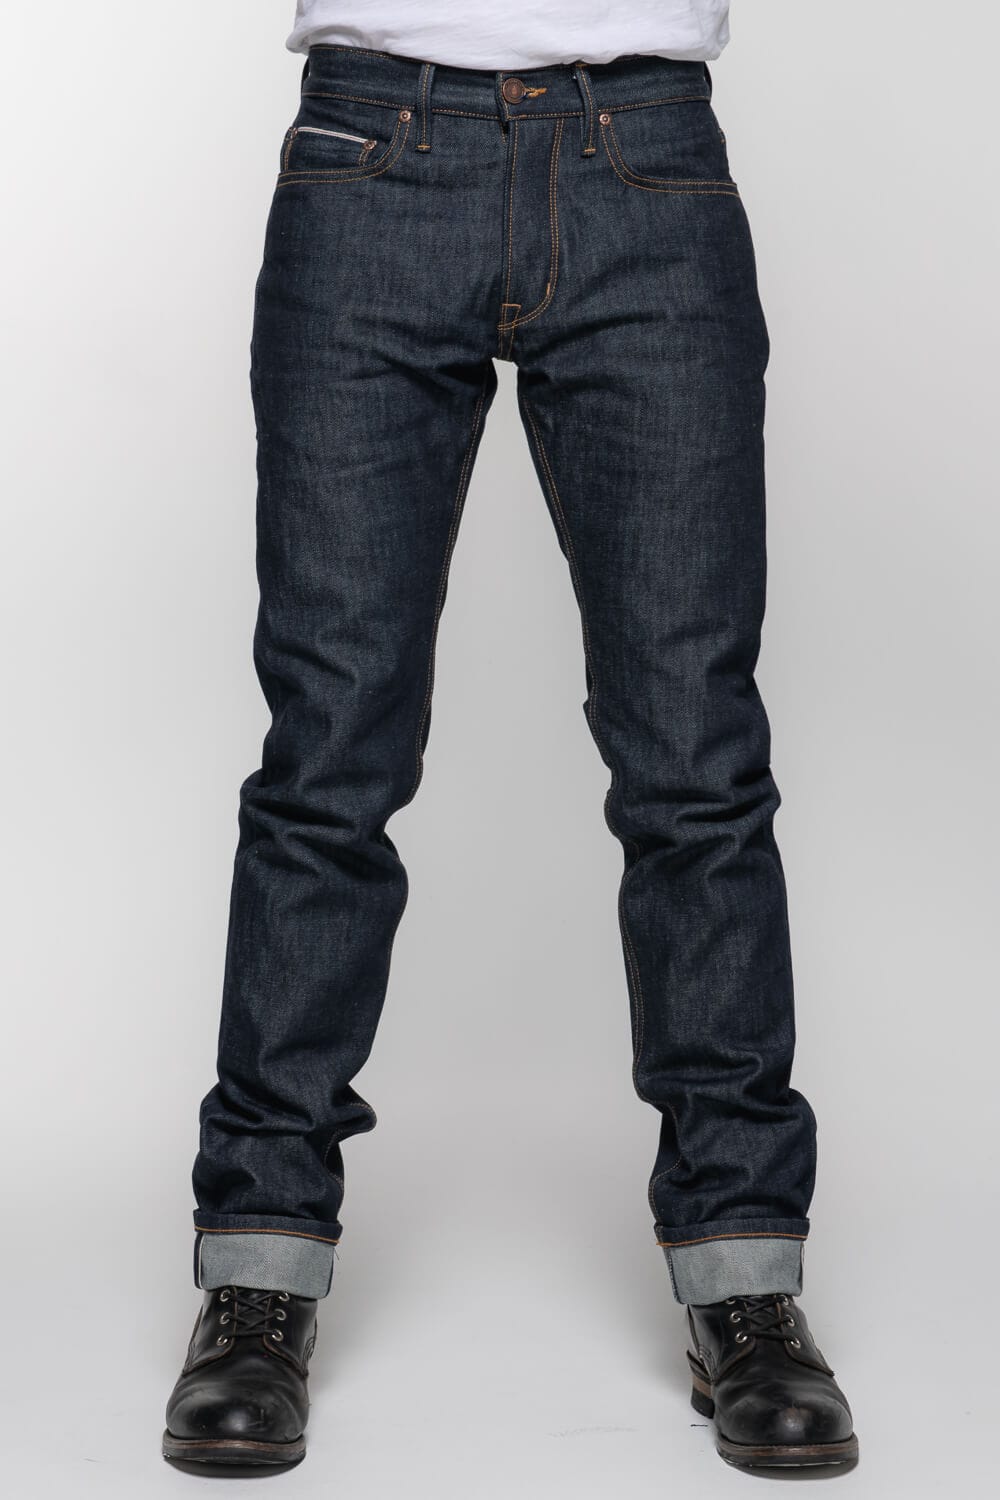 Selvedge Protective Riding Jeans Tobacco Motorwear